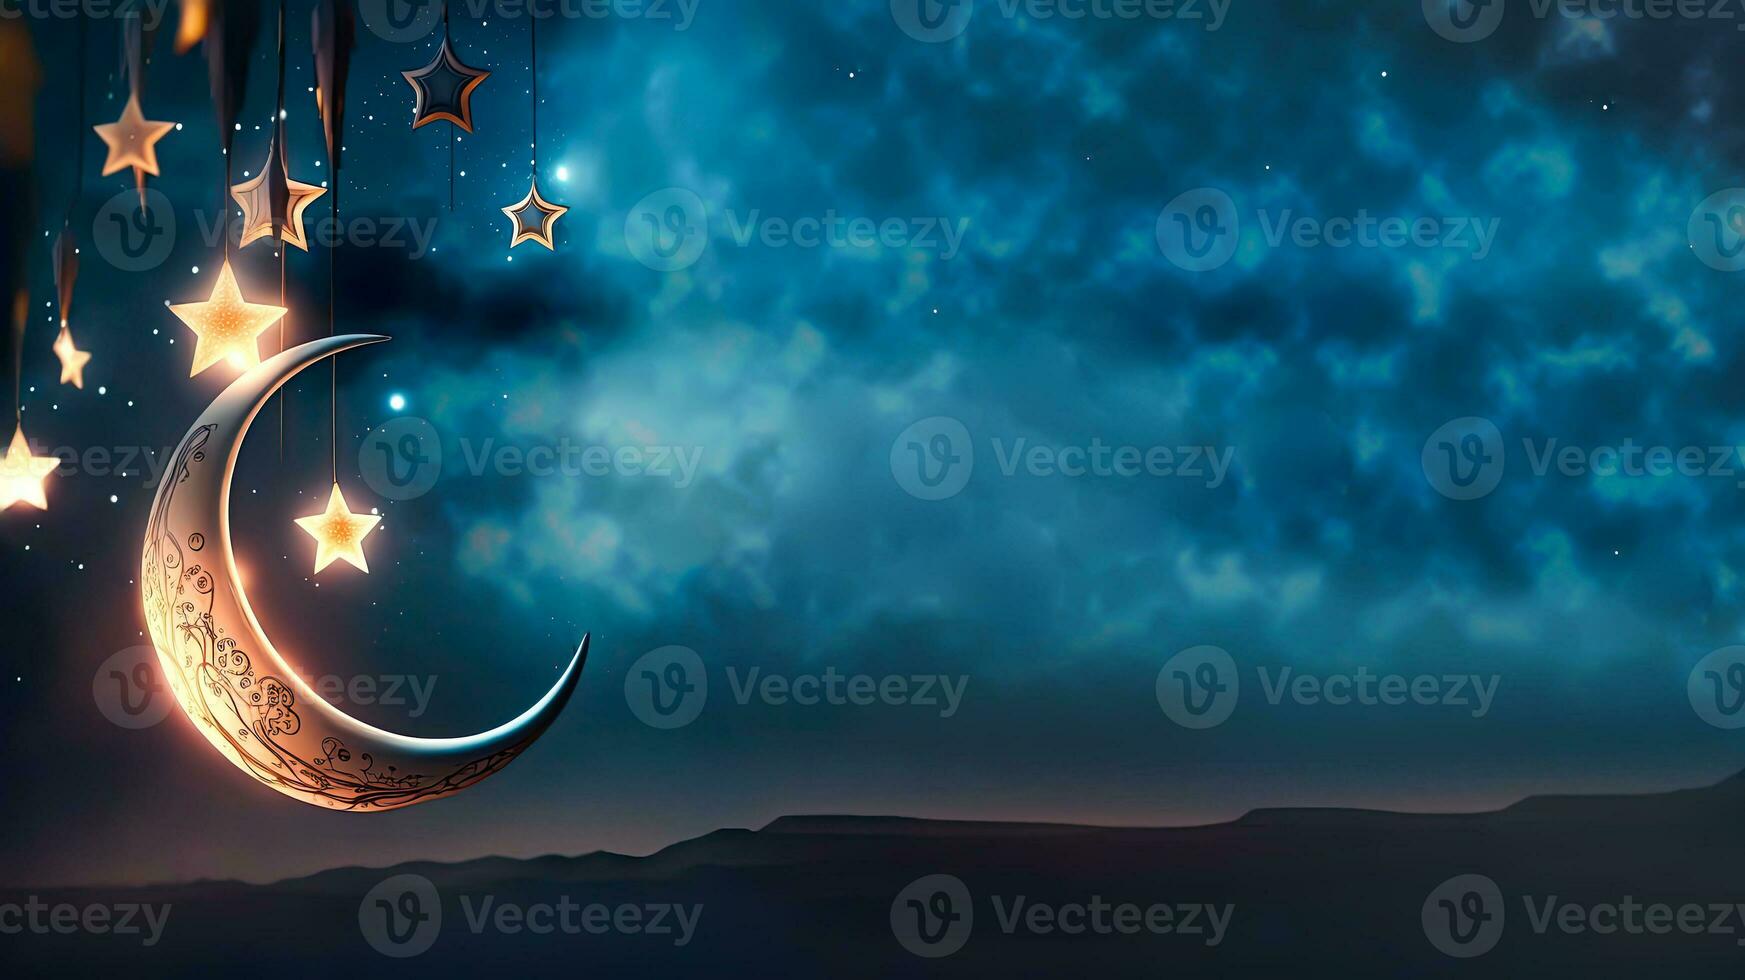 3D Render of Hanging Crescent Moon With Shiny Stars On Blue Grunge Background. photo